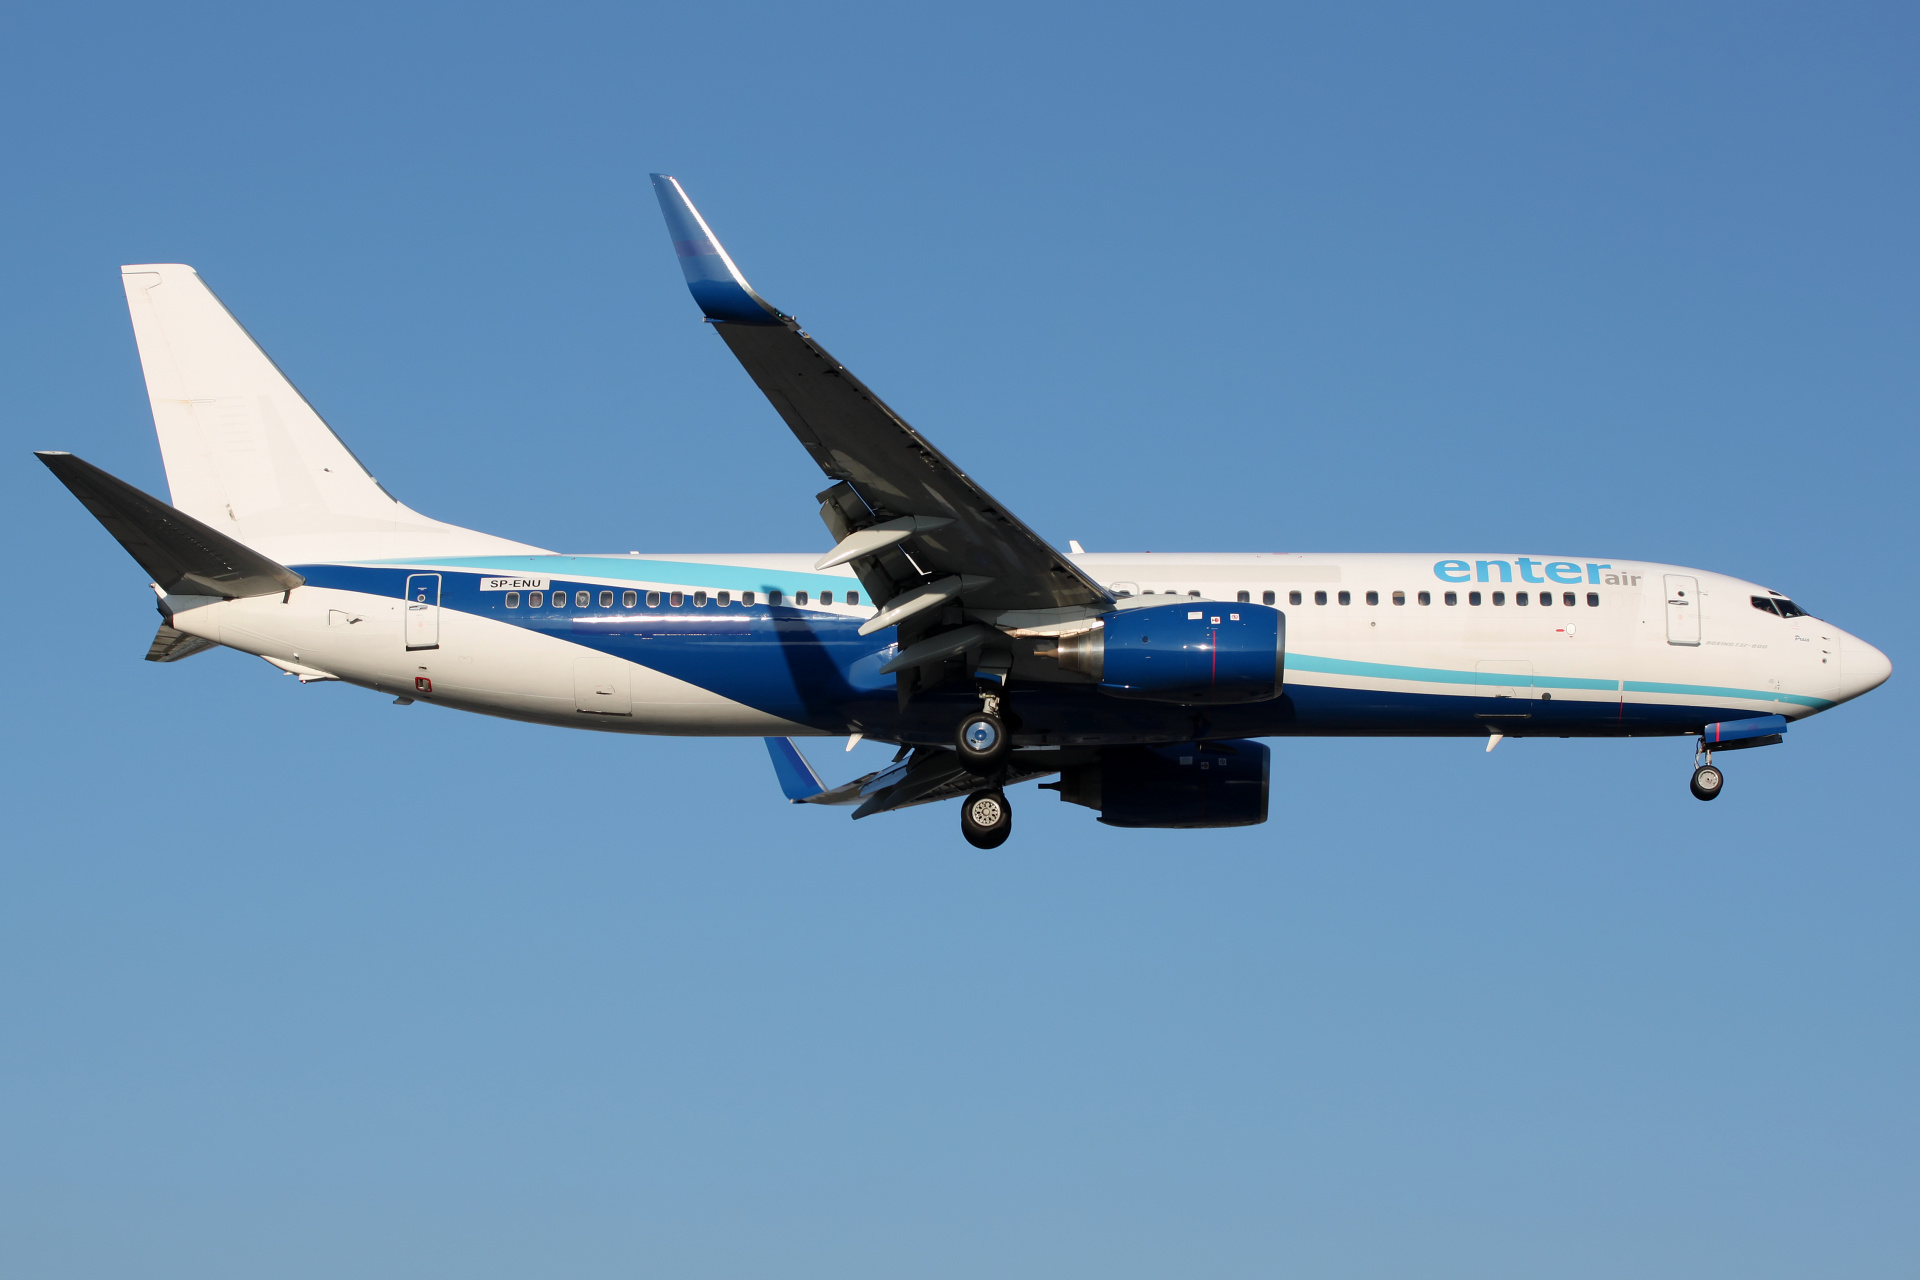 SP-ENU (Cabo Verde Airlines partial livery) (Aircraft » EPWA Spotting » Boeing 737-800 » Enter Air)